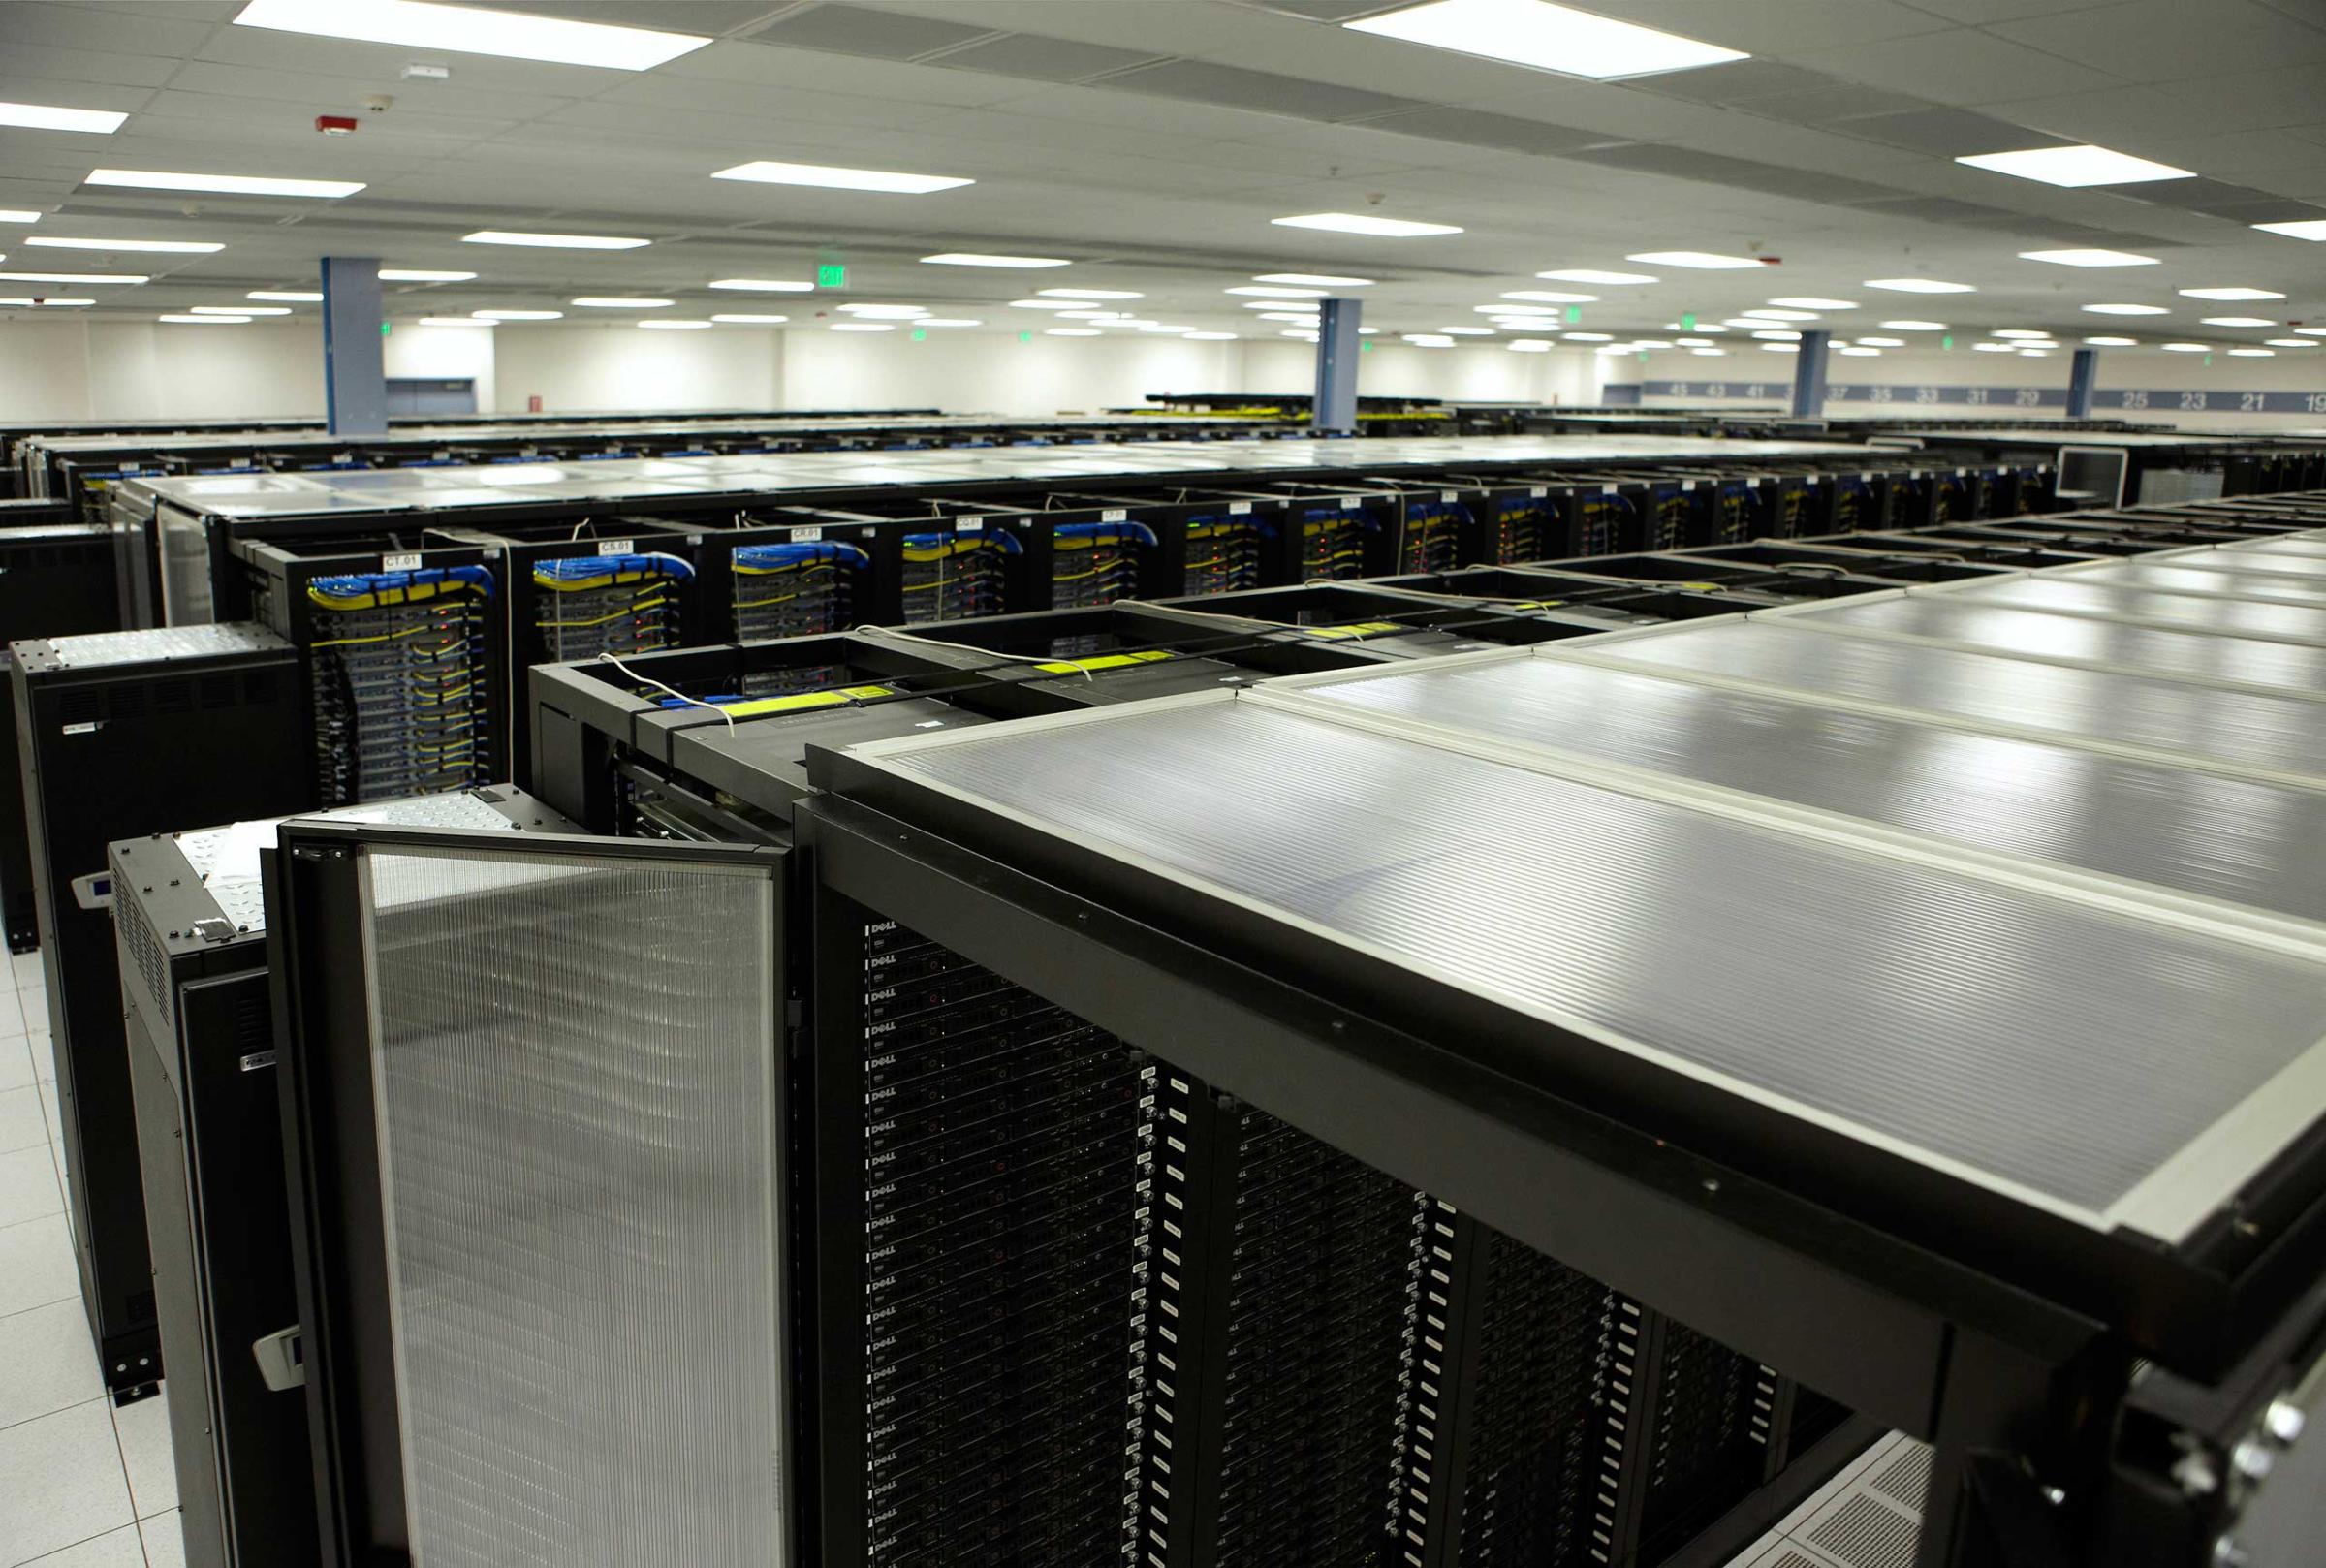 The data center holds tens of thousands servers.